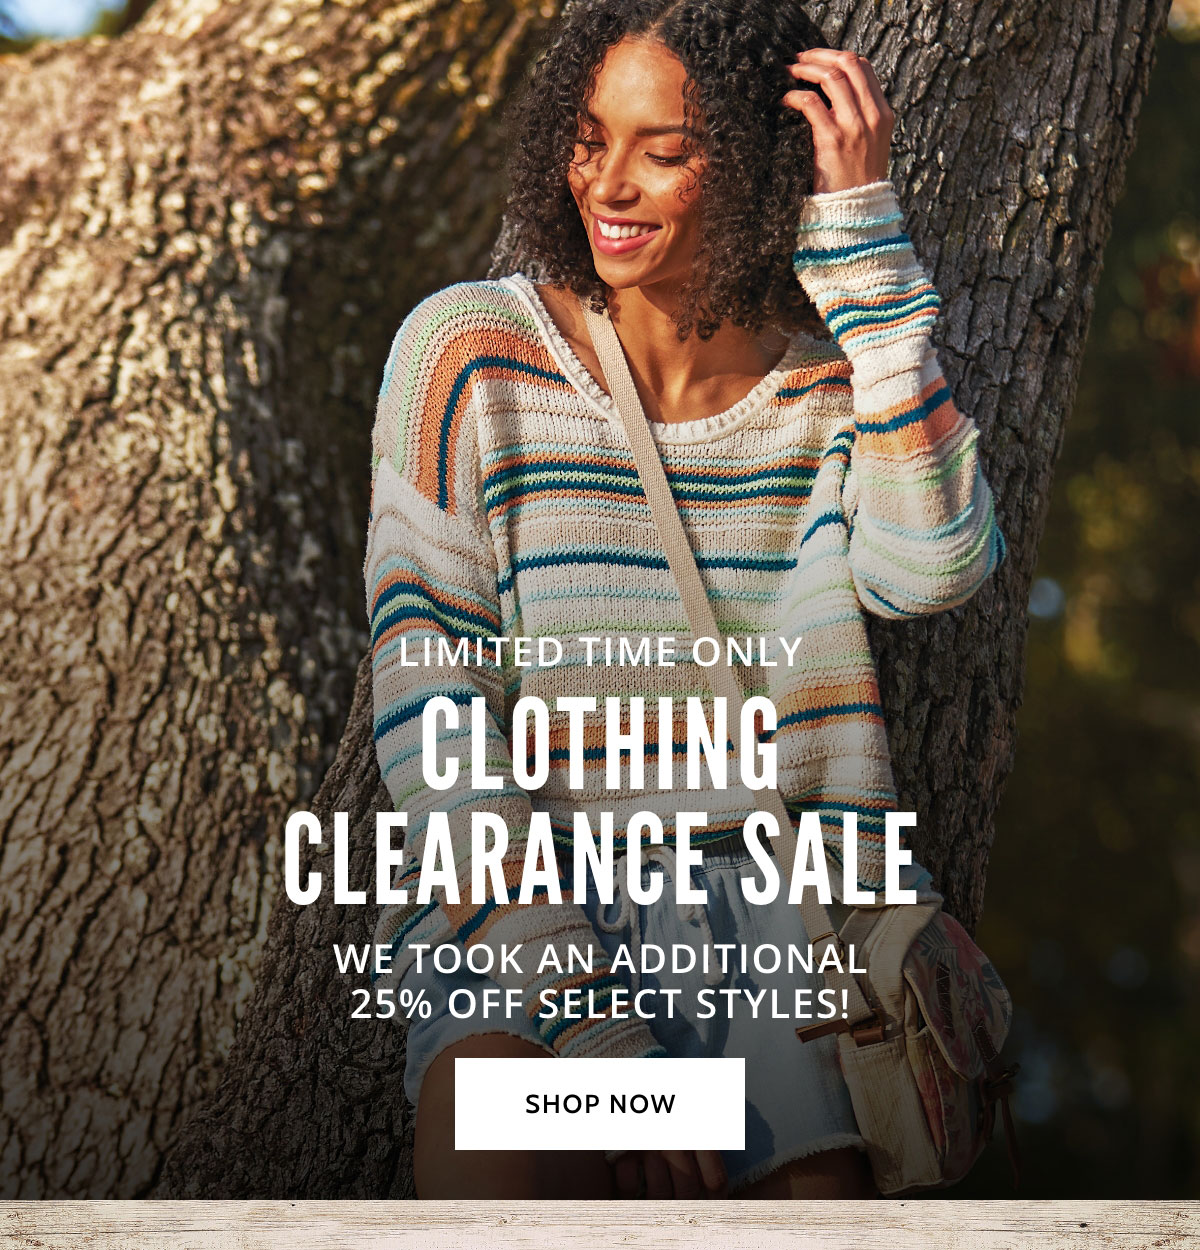 Clothing Clearance Sale Happening Now! - Cabela's